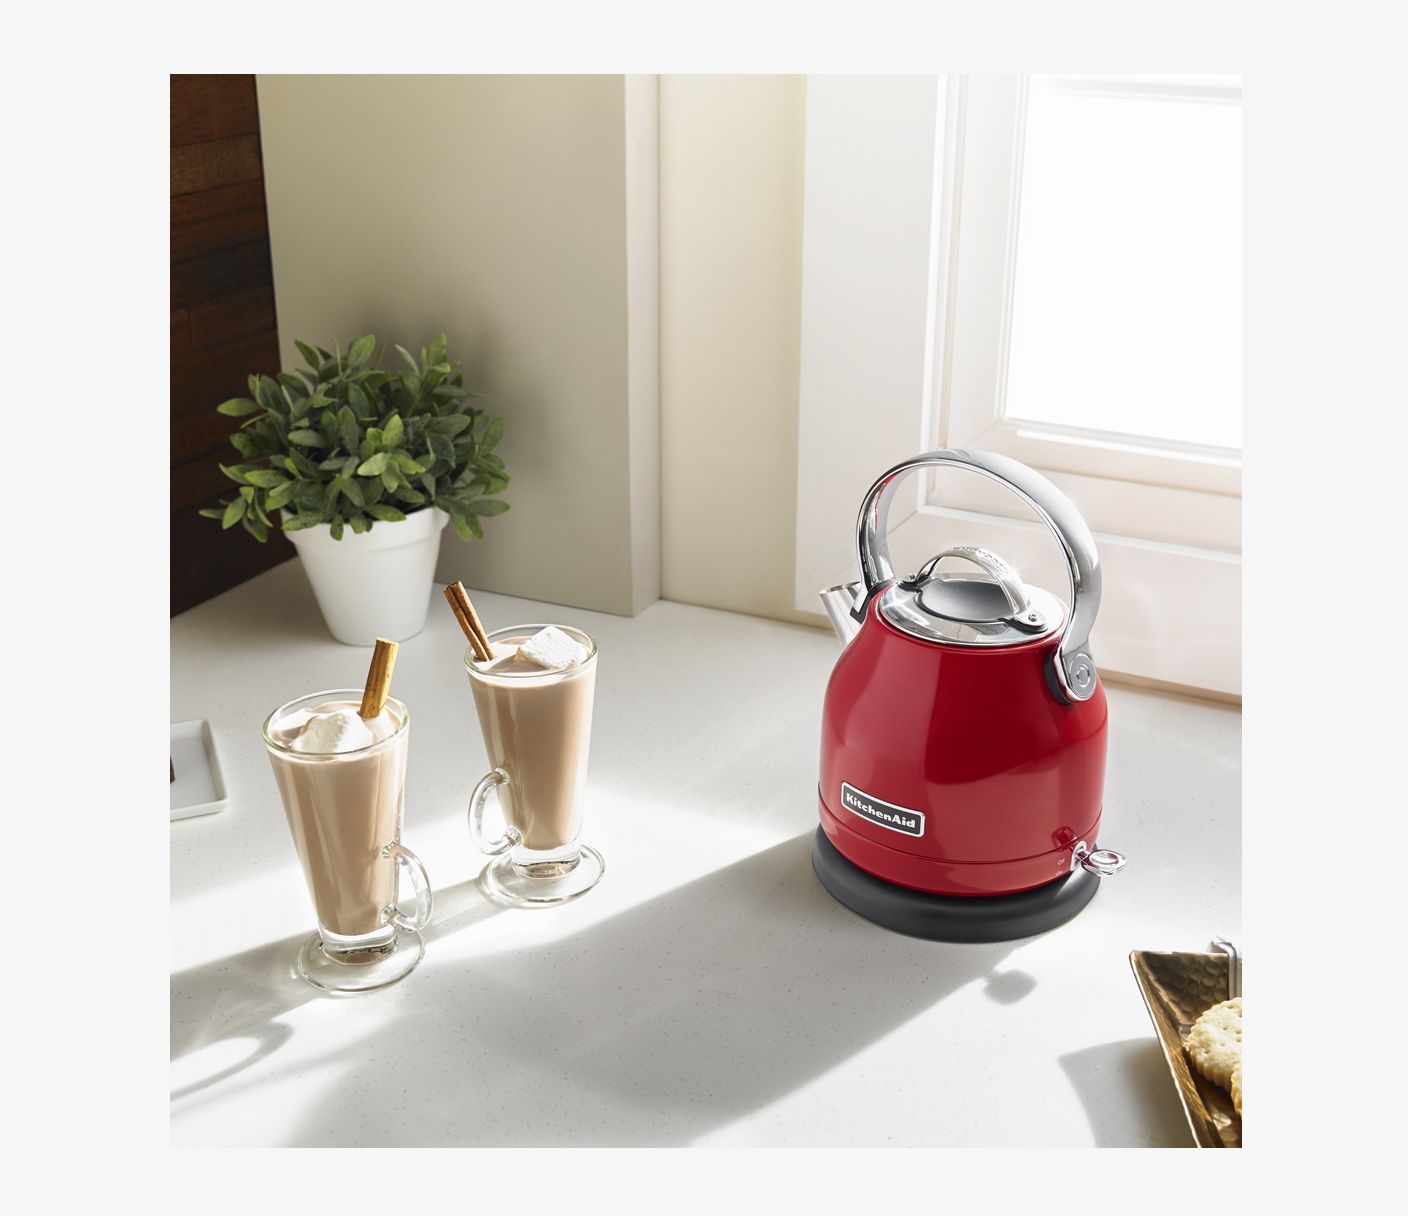 Electric Water Boiler/Tea Kettle from the KitchenAid Pro Line: Candy Apple  Red, Item KEK1522CA